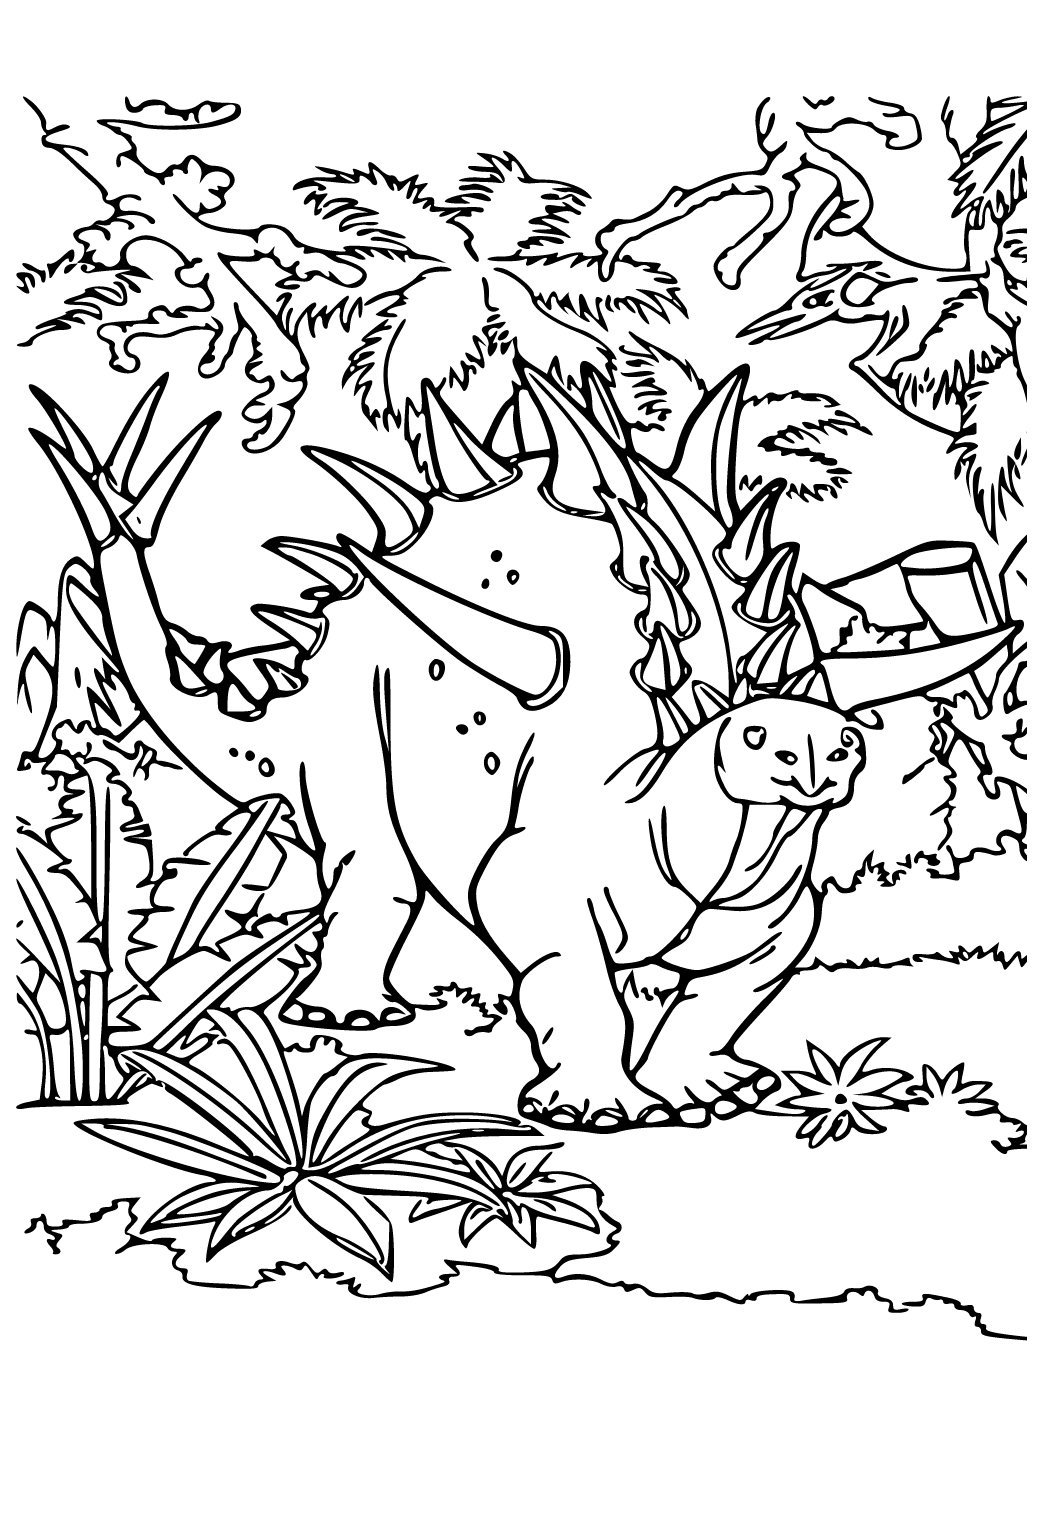 Free printable jurassic world nature coloring page for adults and kids